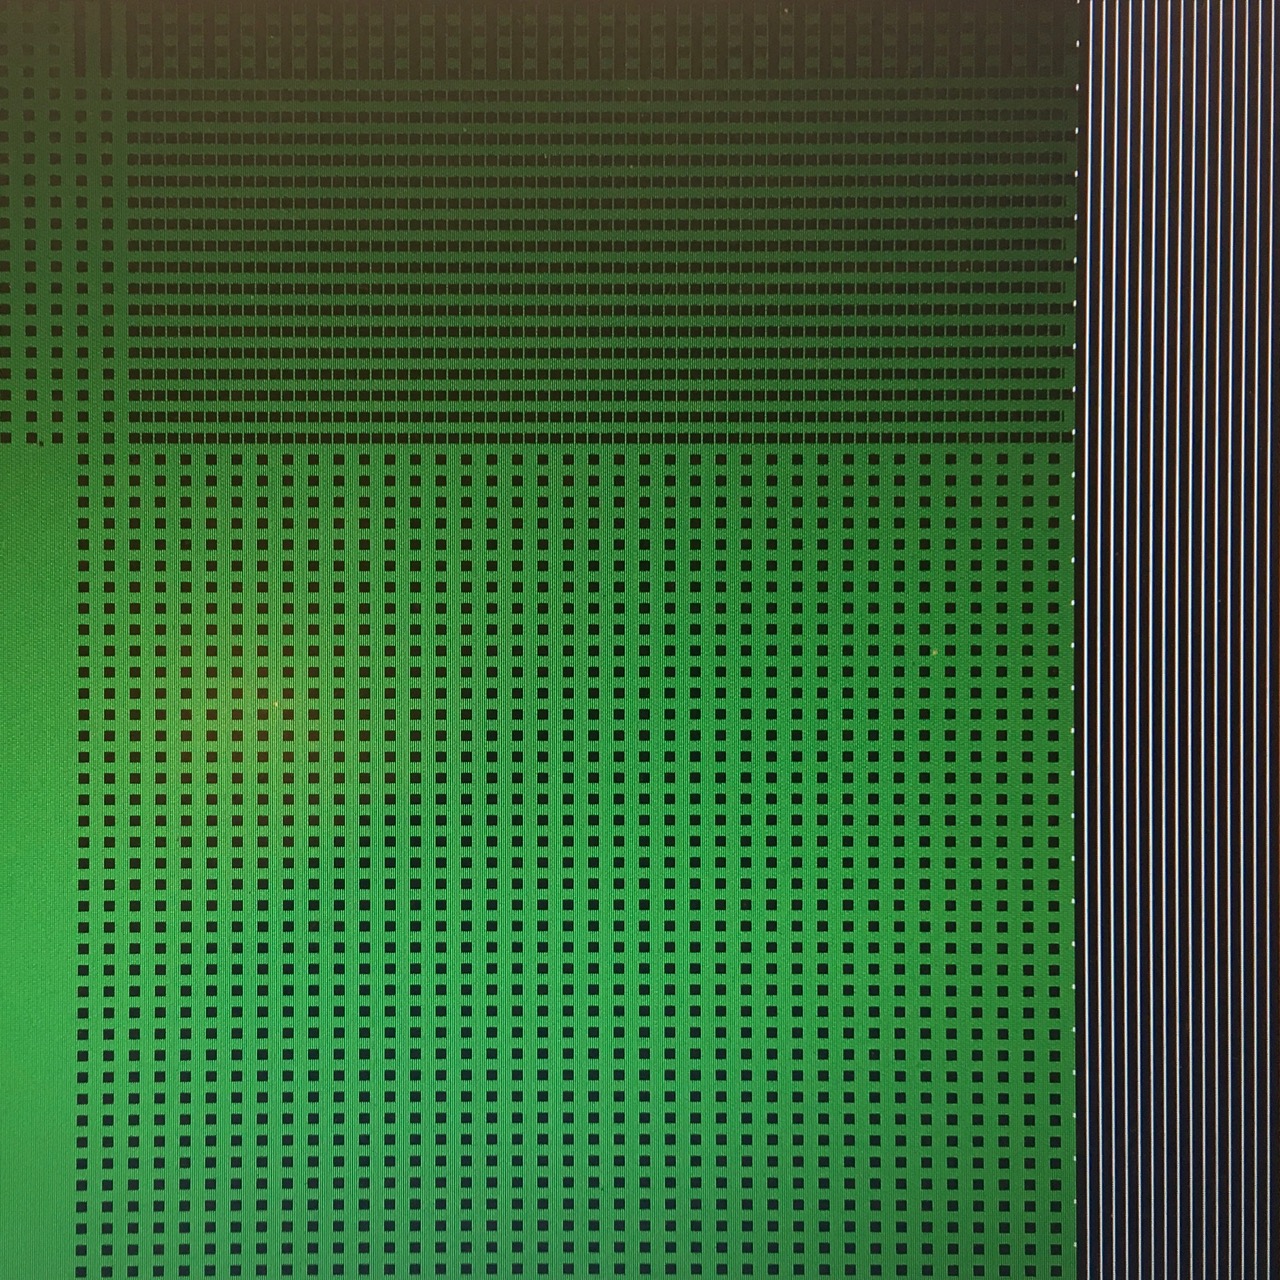 Tweed-like pattern on a computer screen in green, black and white